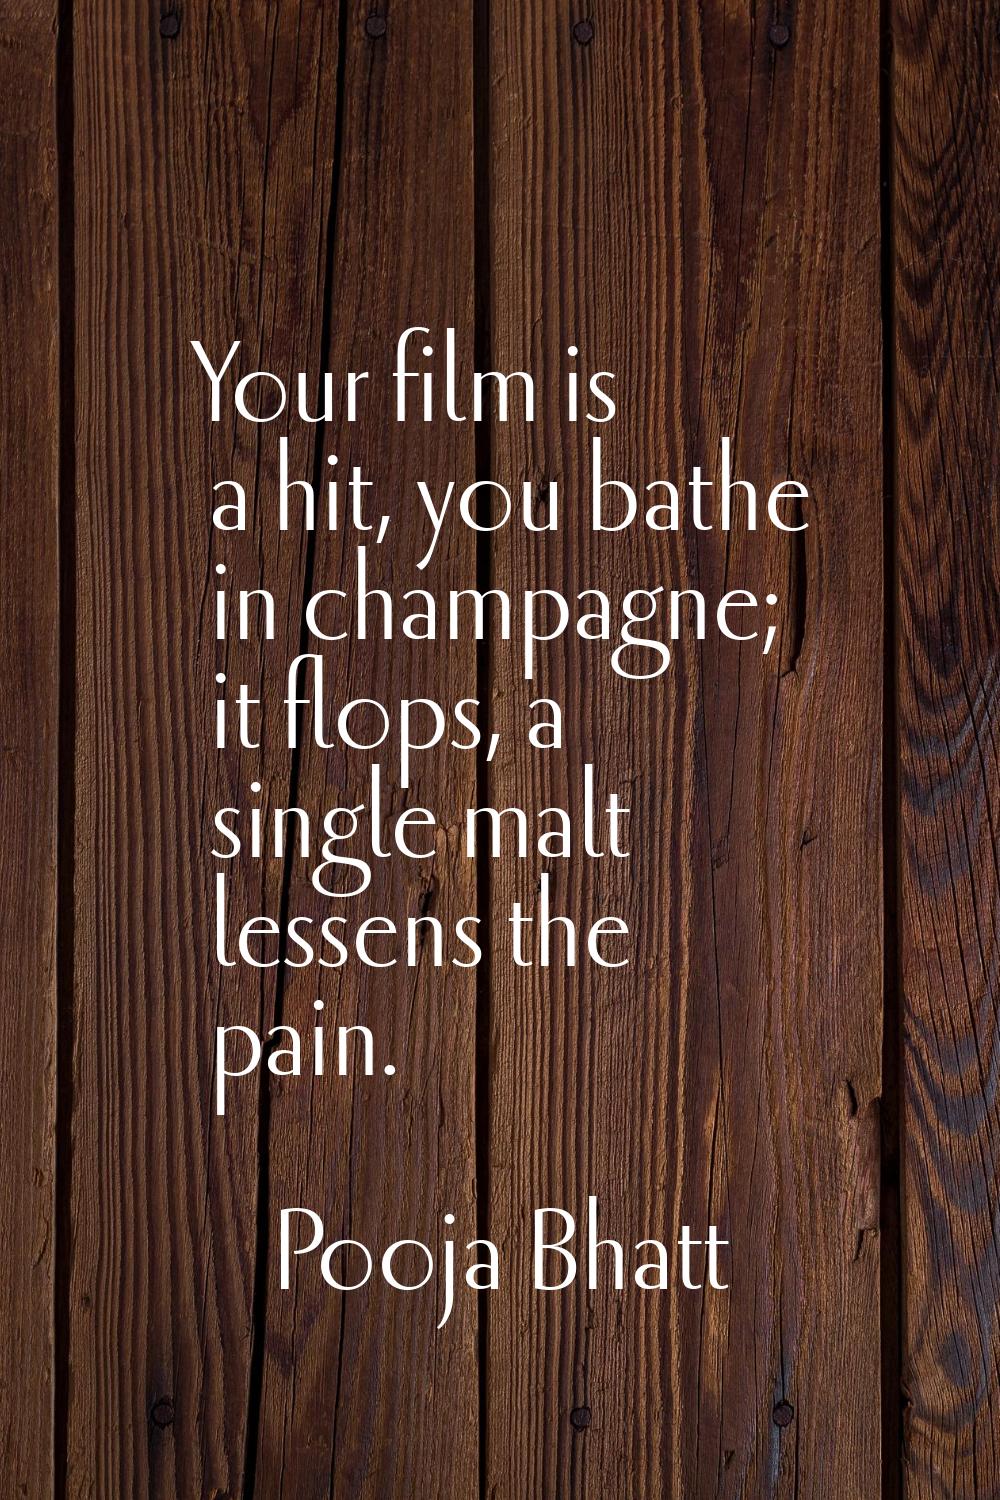 Your film is a hit, you bathe in champagne; it flops, a single malt lessens the pain.